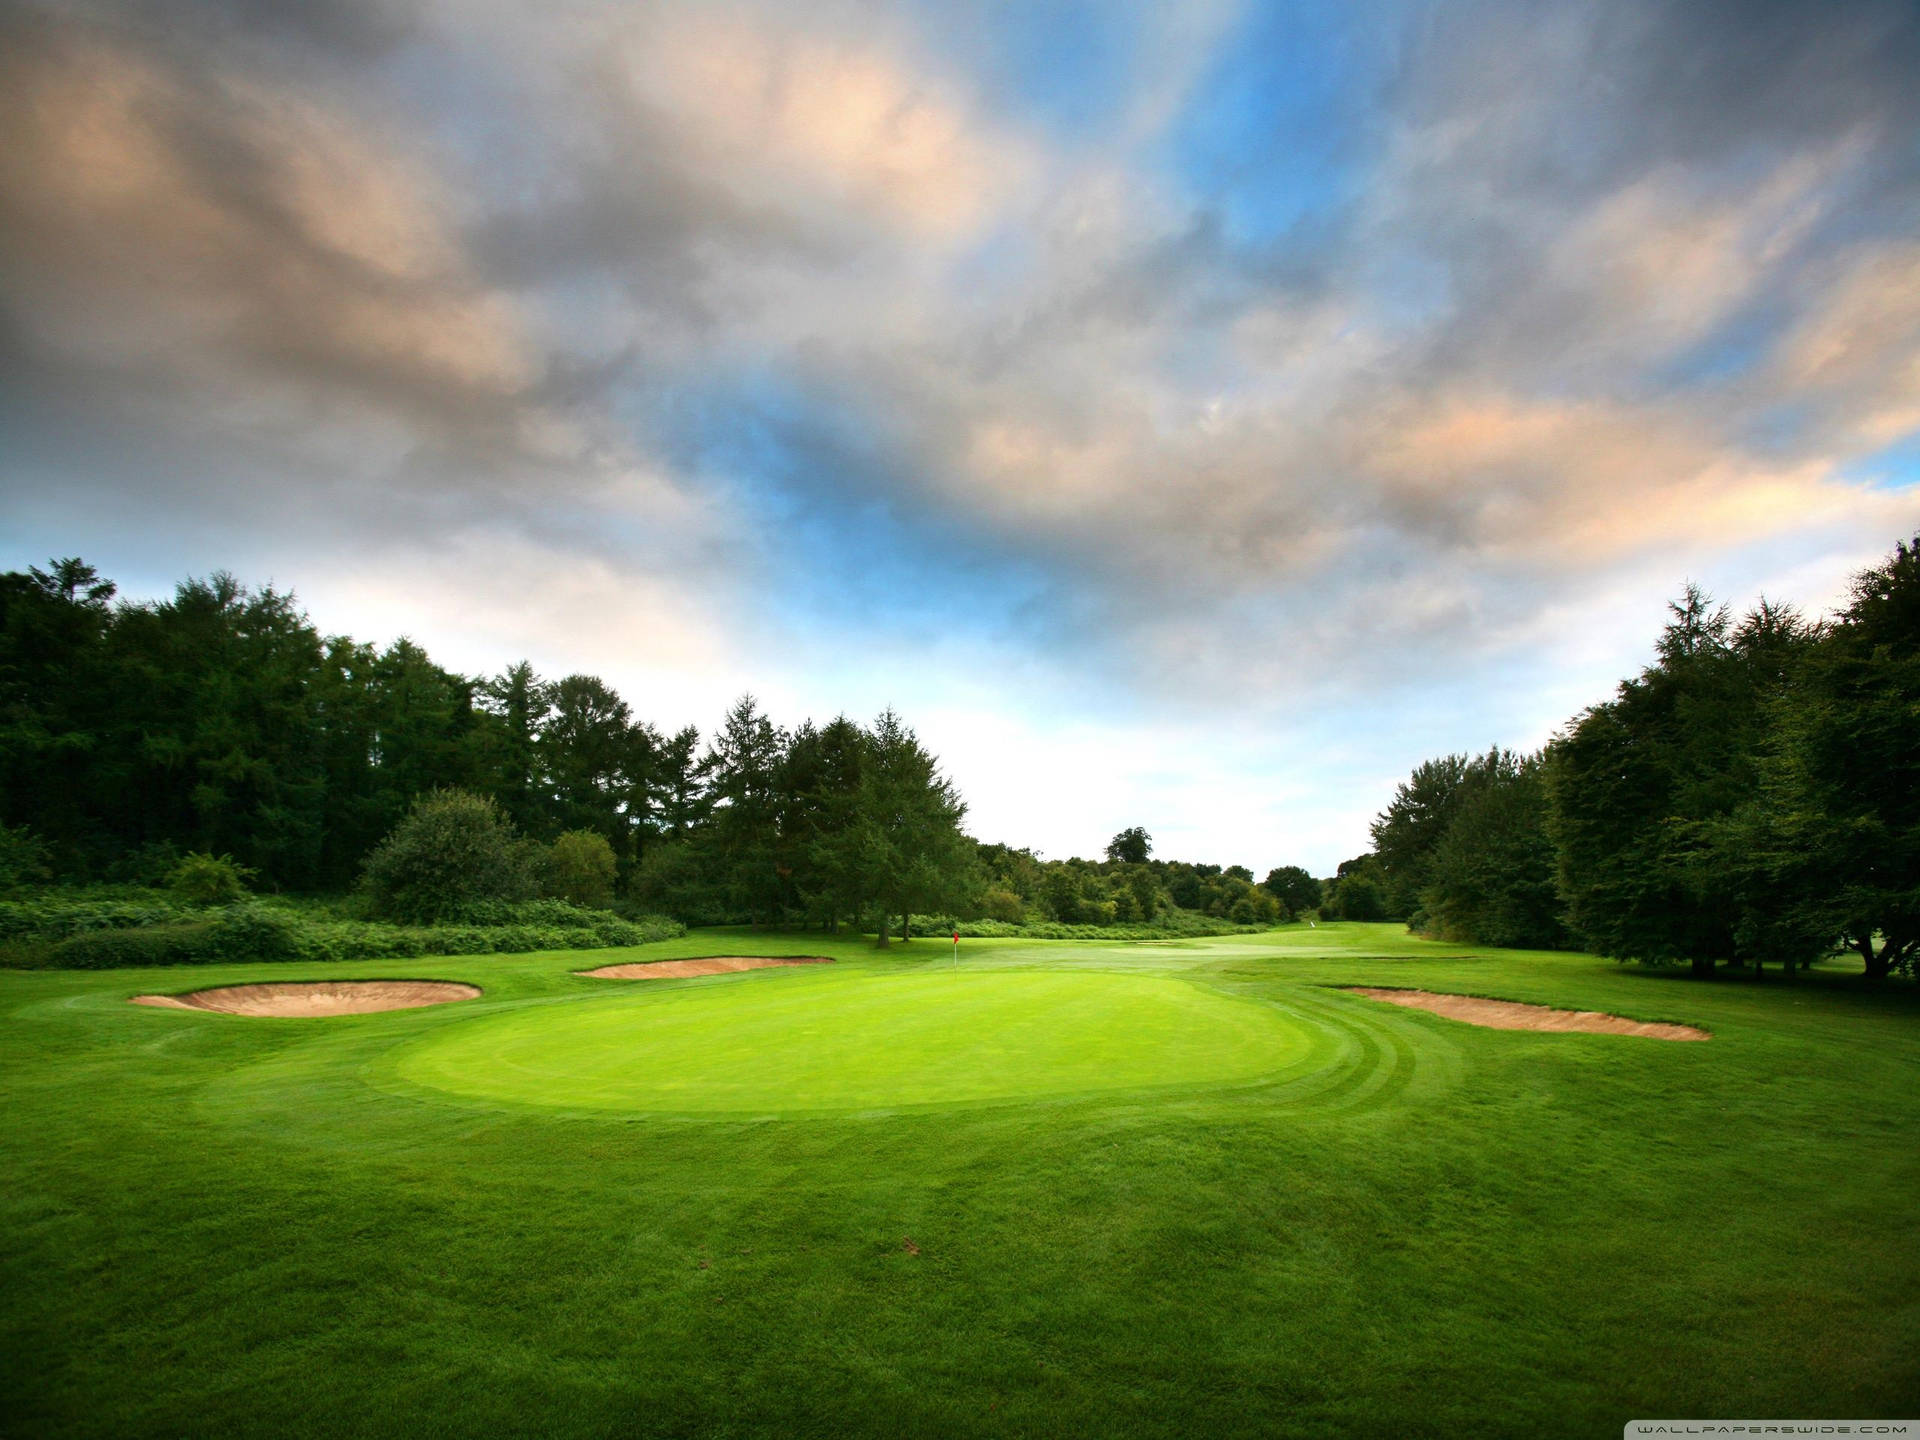 Golf Course Under The Clouds Wallpaper